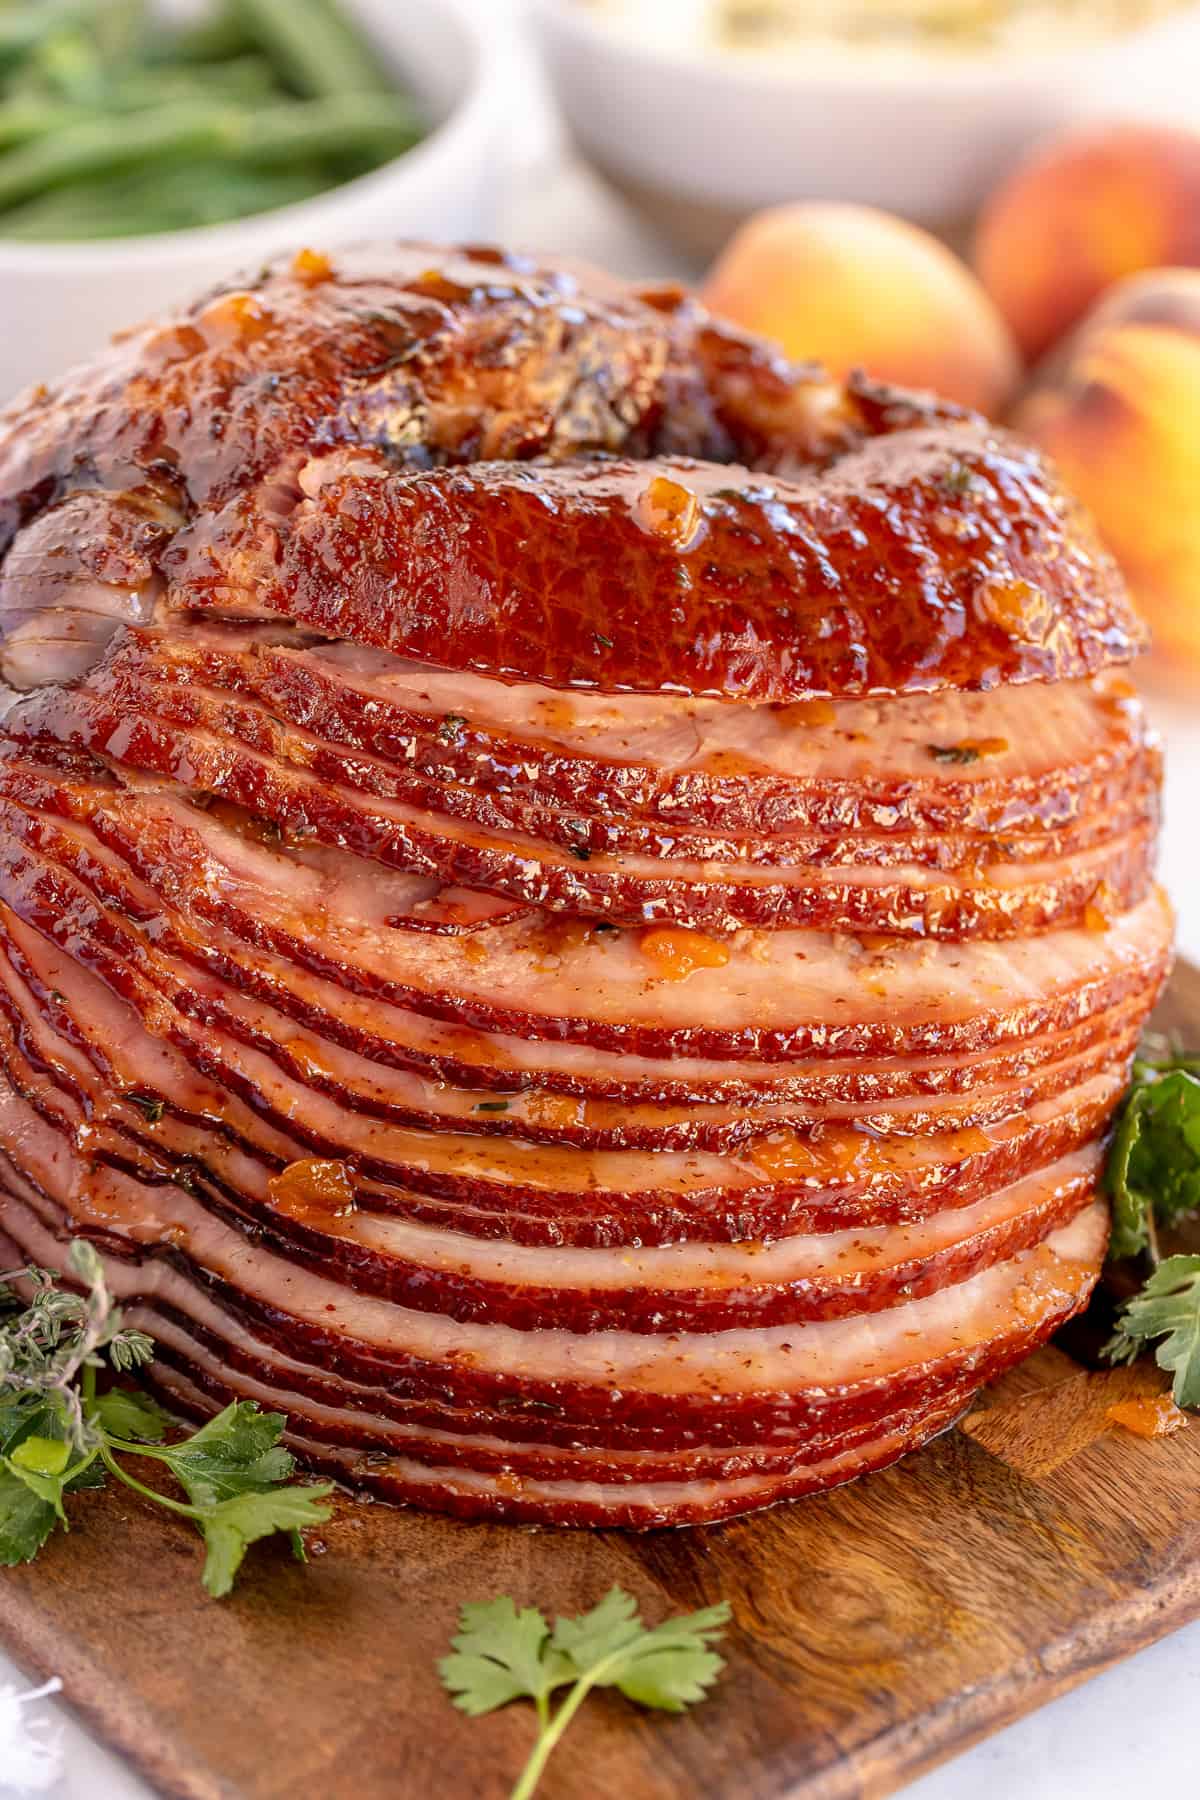 A slow cooked spiral ham with peach thyme glaze on a wood board.